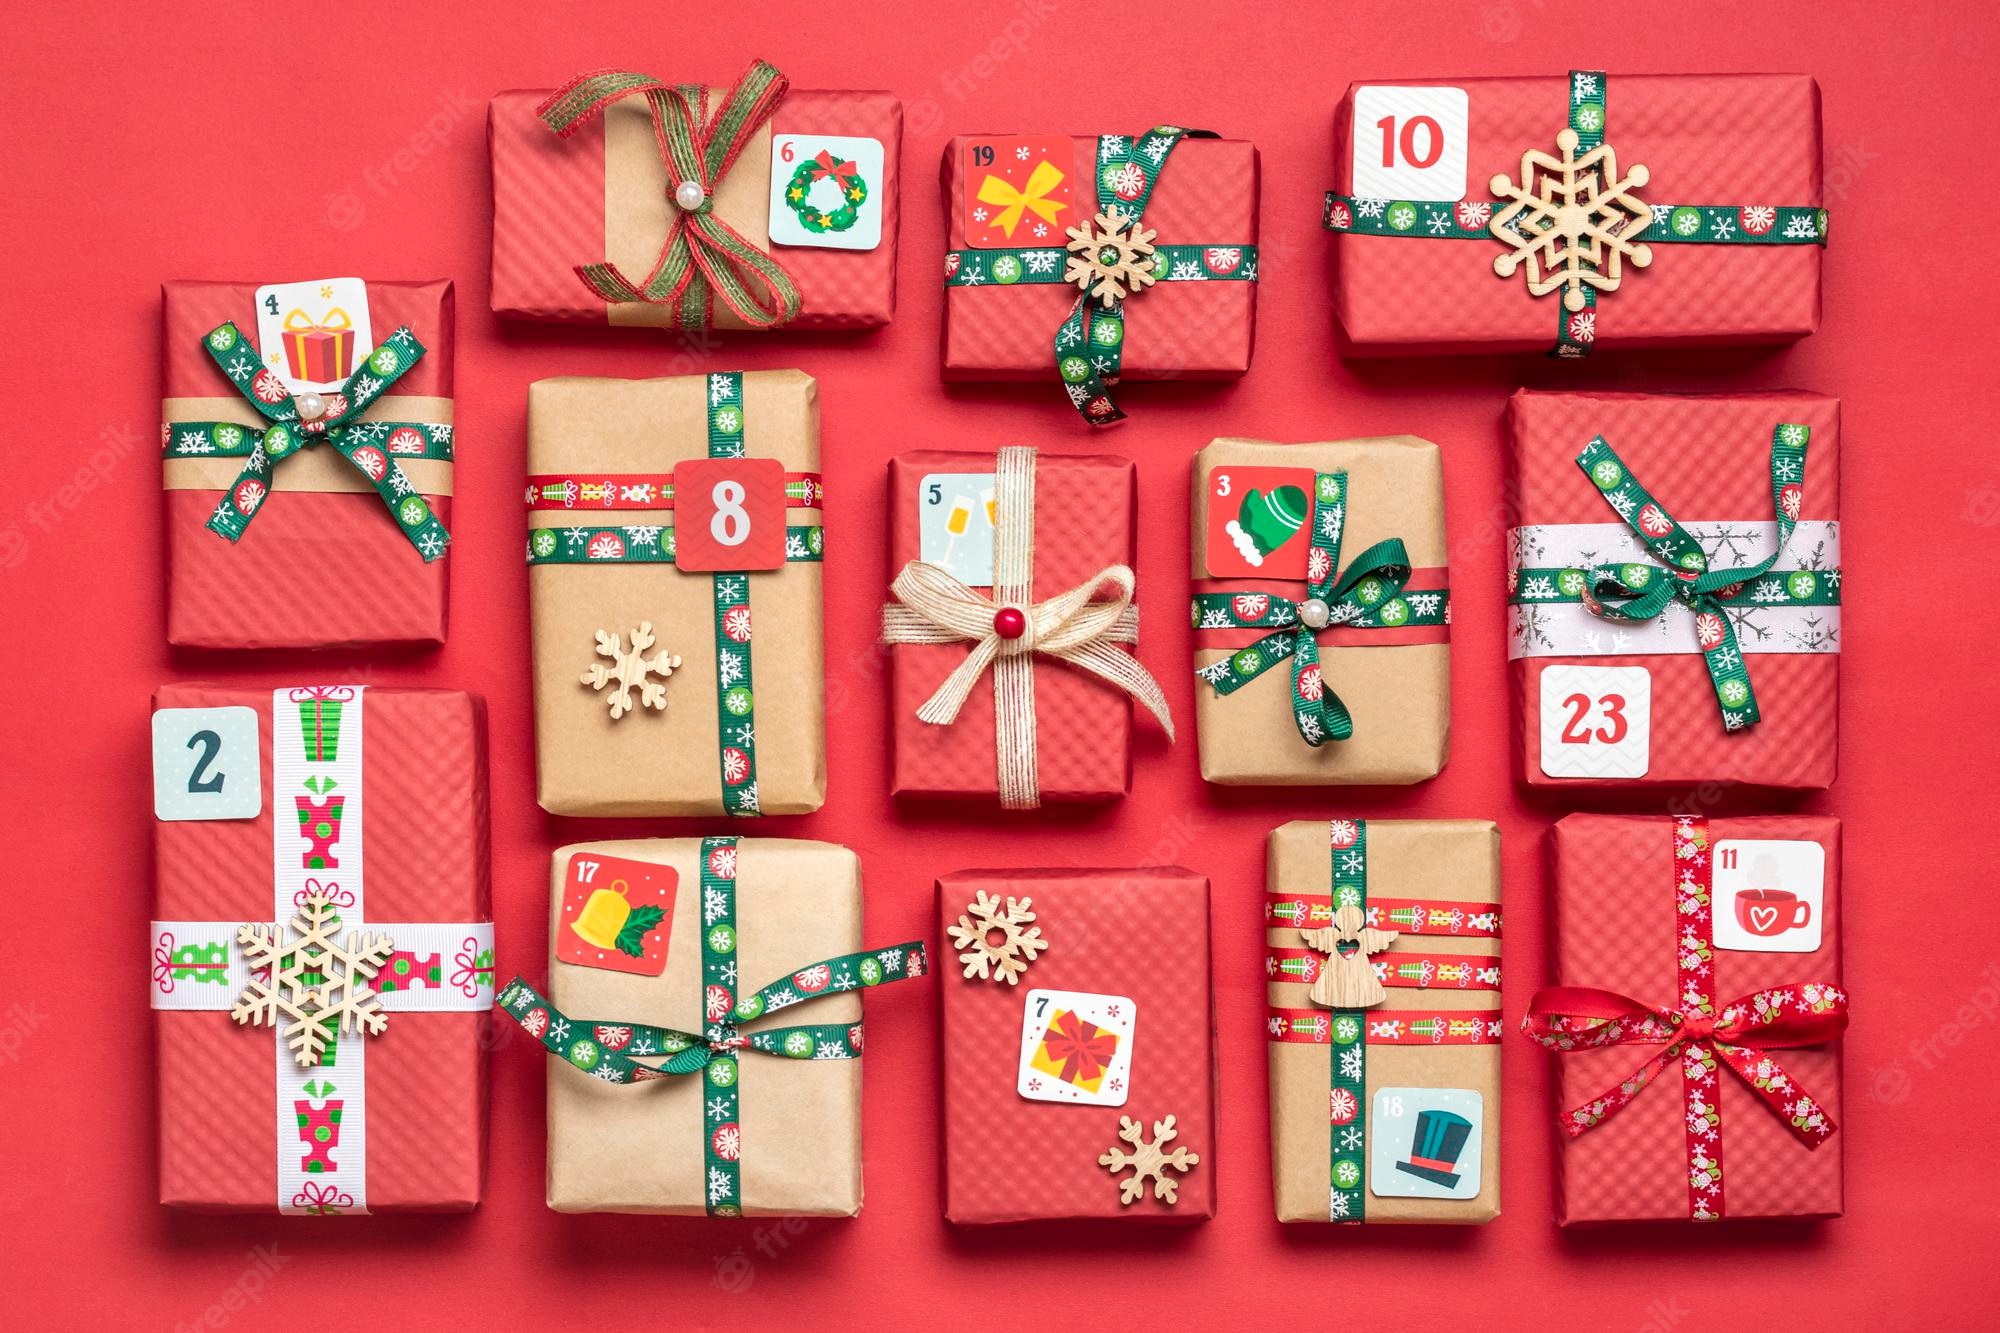 The Advent Calendar Box Will Transform Your Christmas Season from Boring To Exciting and Adventurous